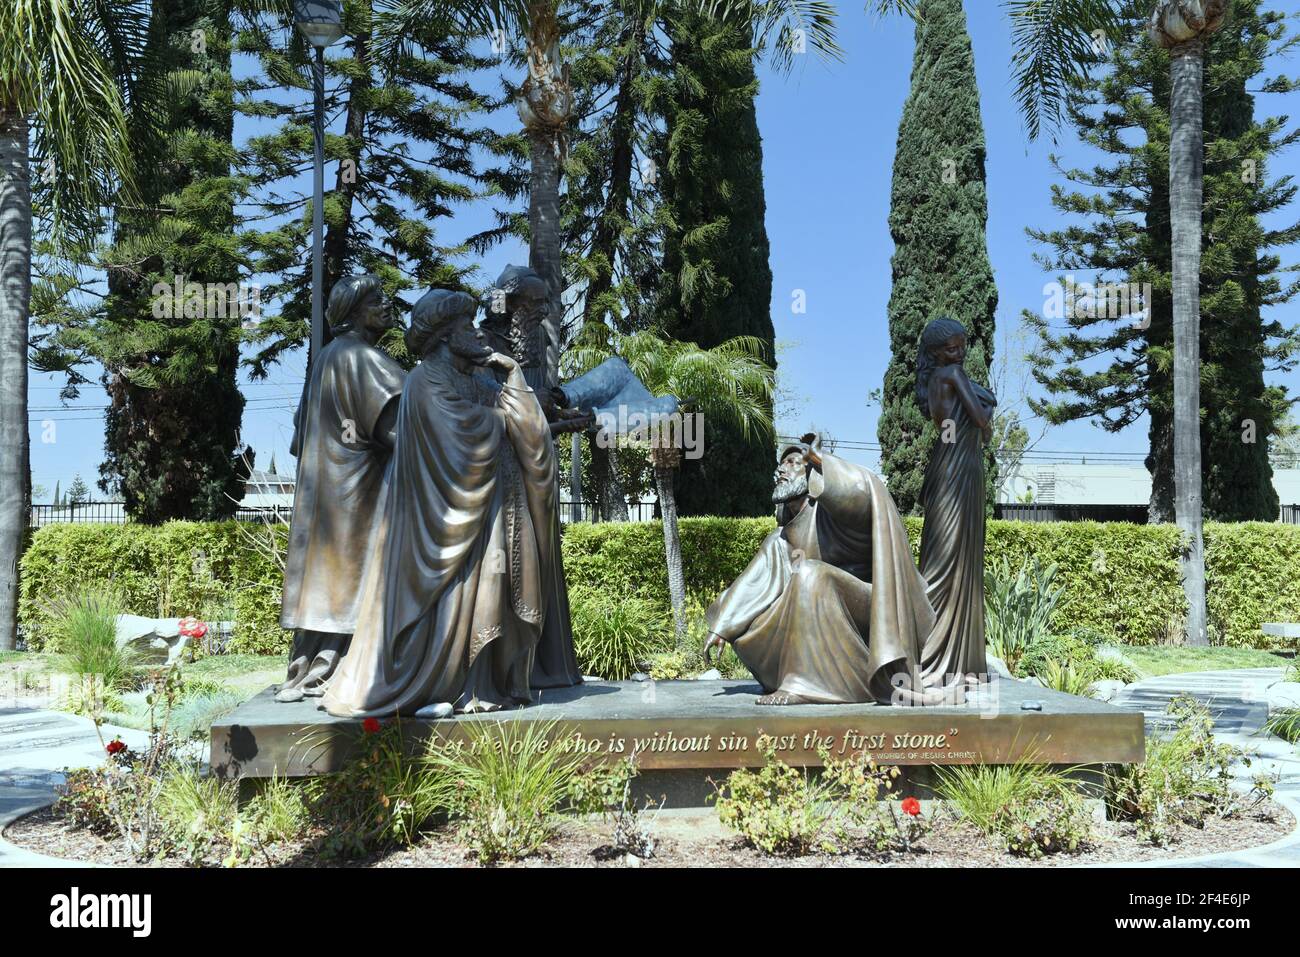 GARDEN GROVE, CALIFORNIA - 20 MAR 2021: Who Will Cast the First Stone sculpture at the Crystal Cathedral. Stock Photo